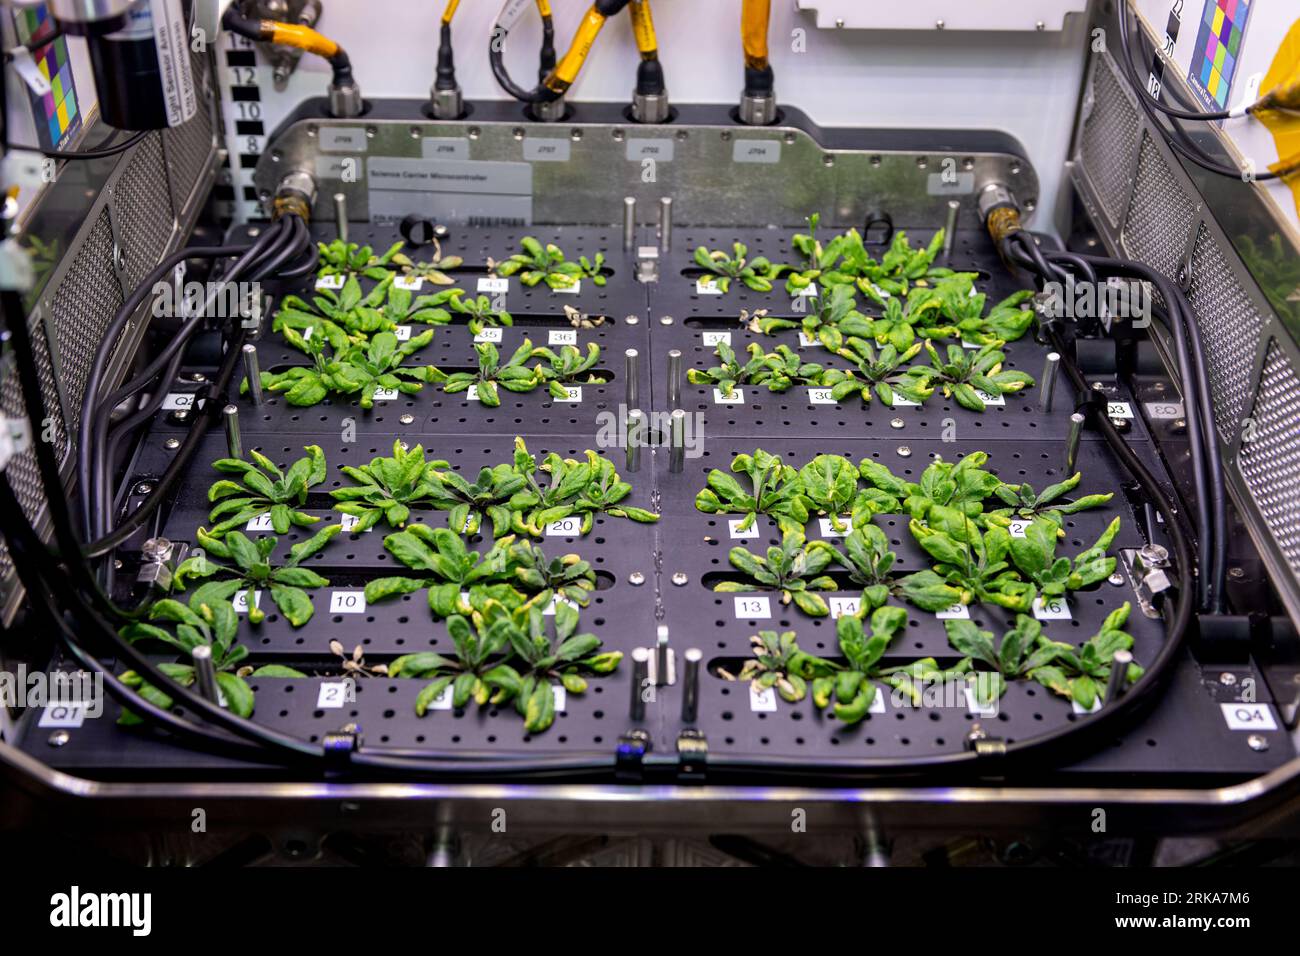 Earth Atmosphere. 8th Aug, 2023. Thale cress plants, similar to cabbage and mustard, are pictured growing for the Plant Habitat-03 space botany experiment helping researchers learn how to grow food and sustain crews on future space missions. Credit: NASA/ZUMA Press Wire/ZUMAPRESS.com/Alamy Live News Stock Photo